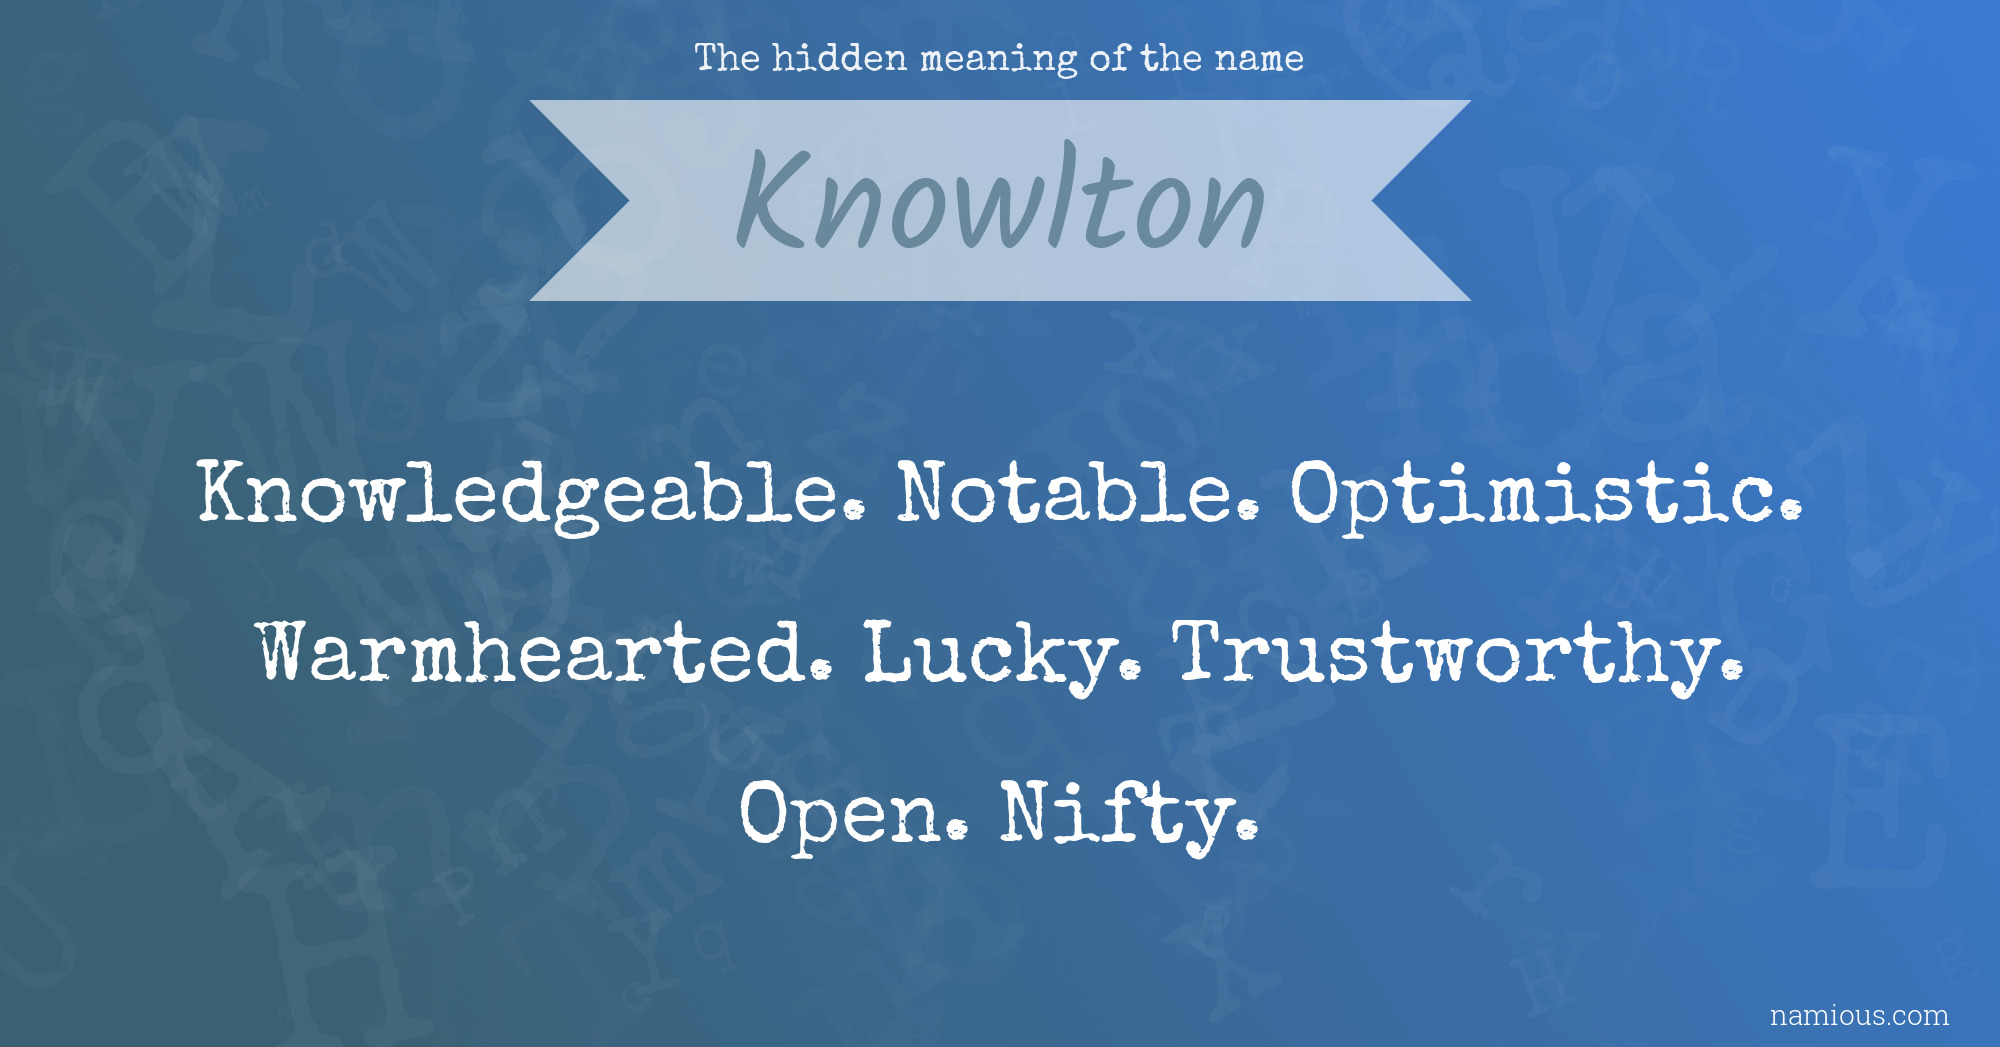 The hidden meaning of the name Knowlton